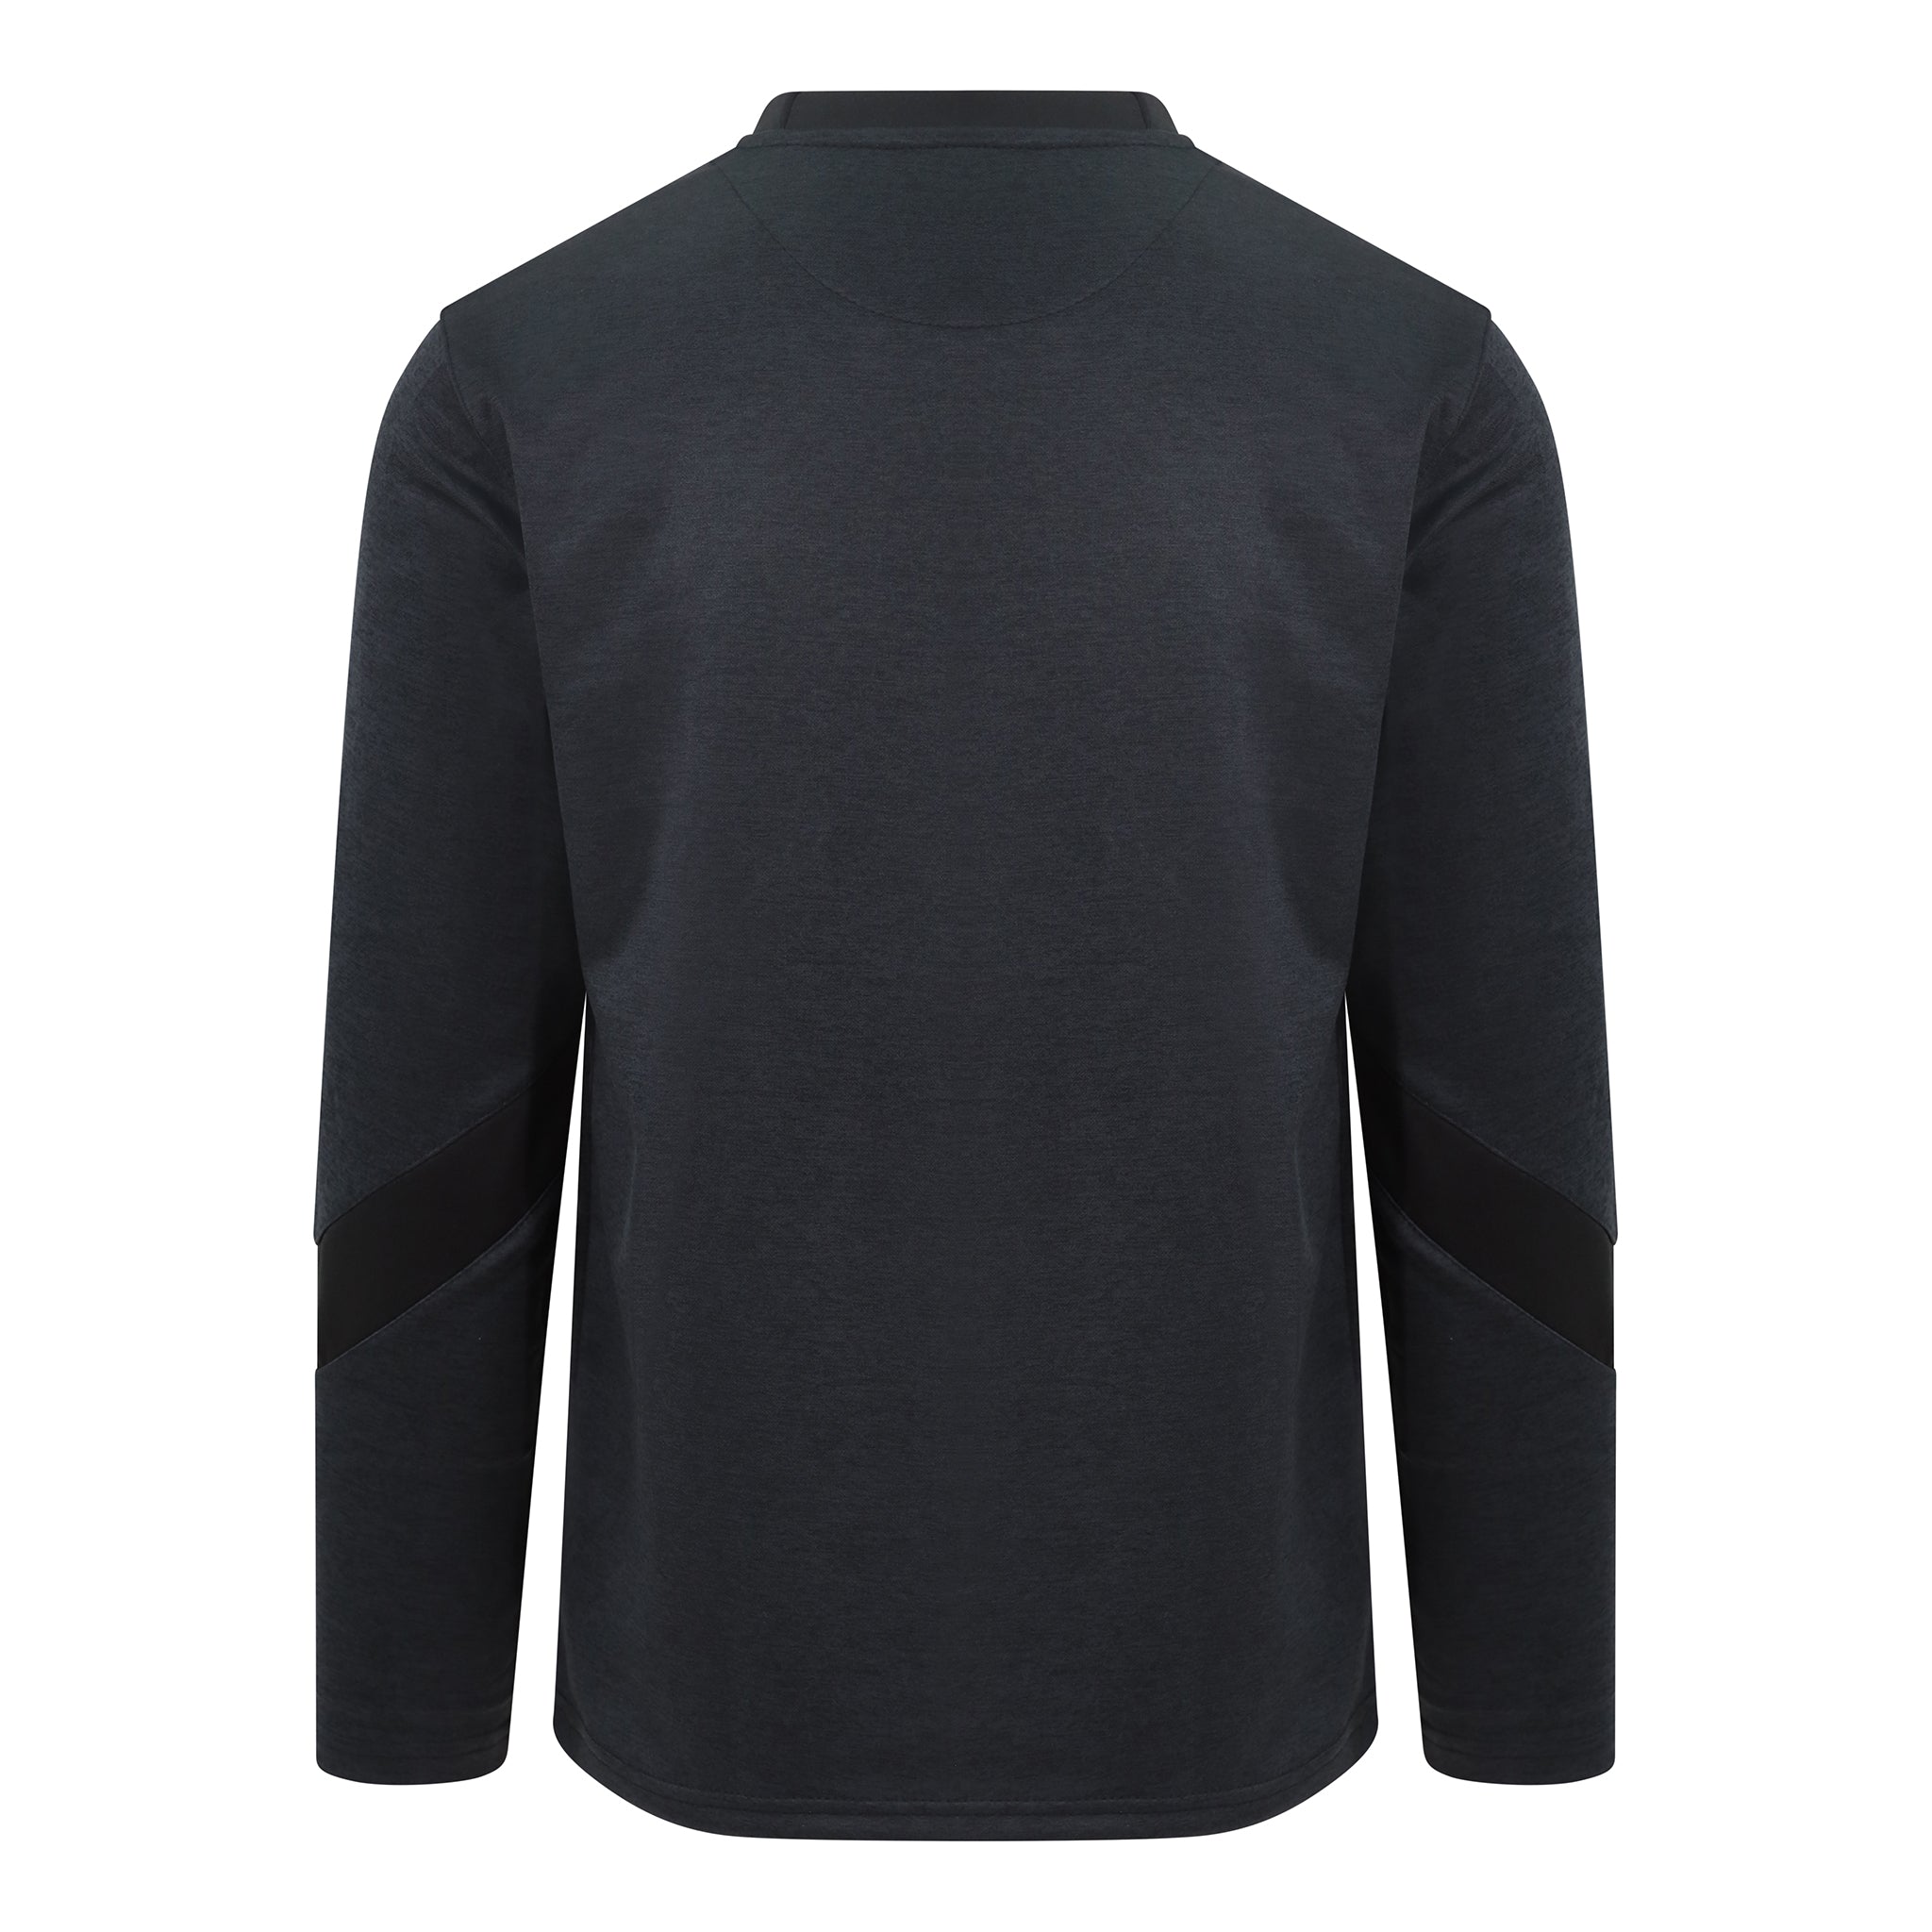 Mc Keever Core 22 Sweat Top - Youth - Black